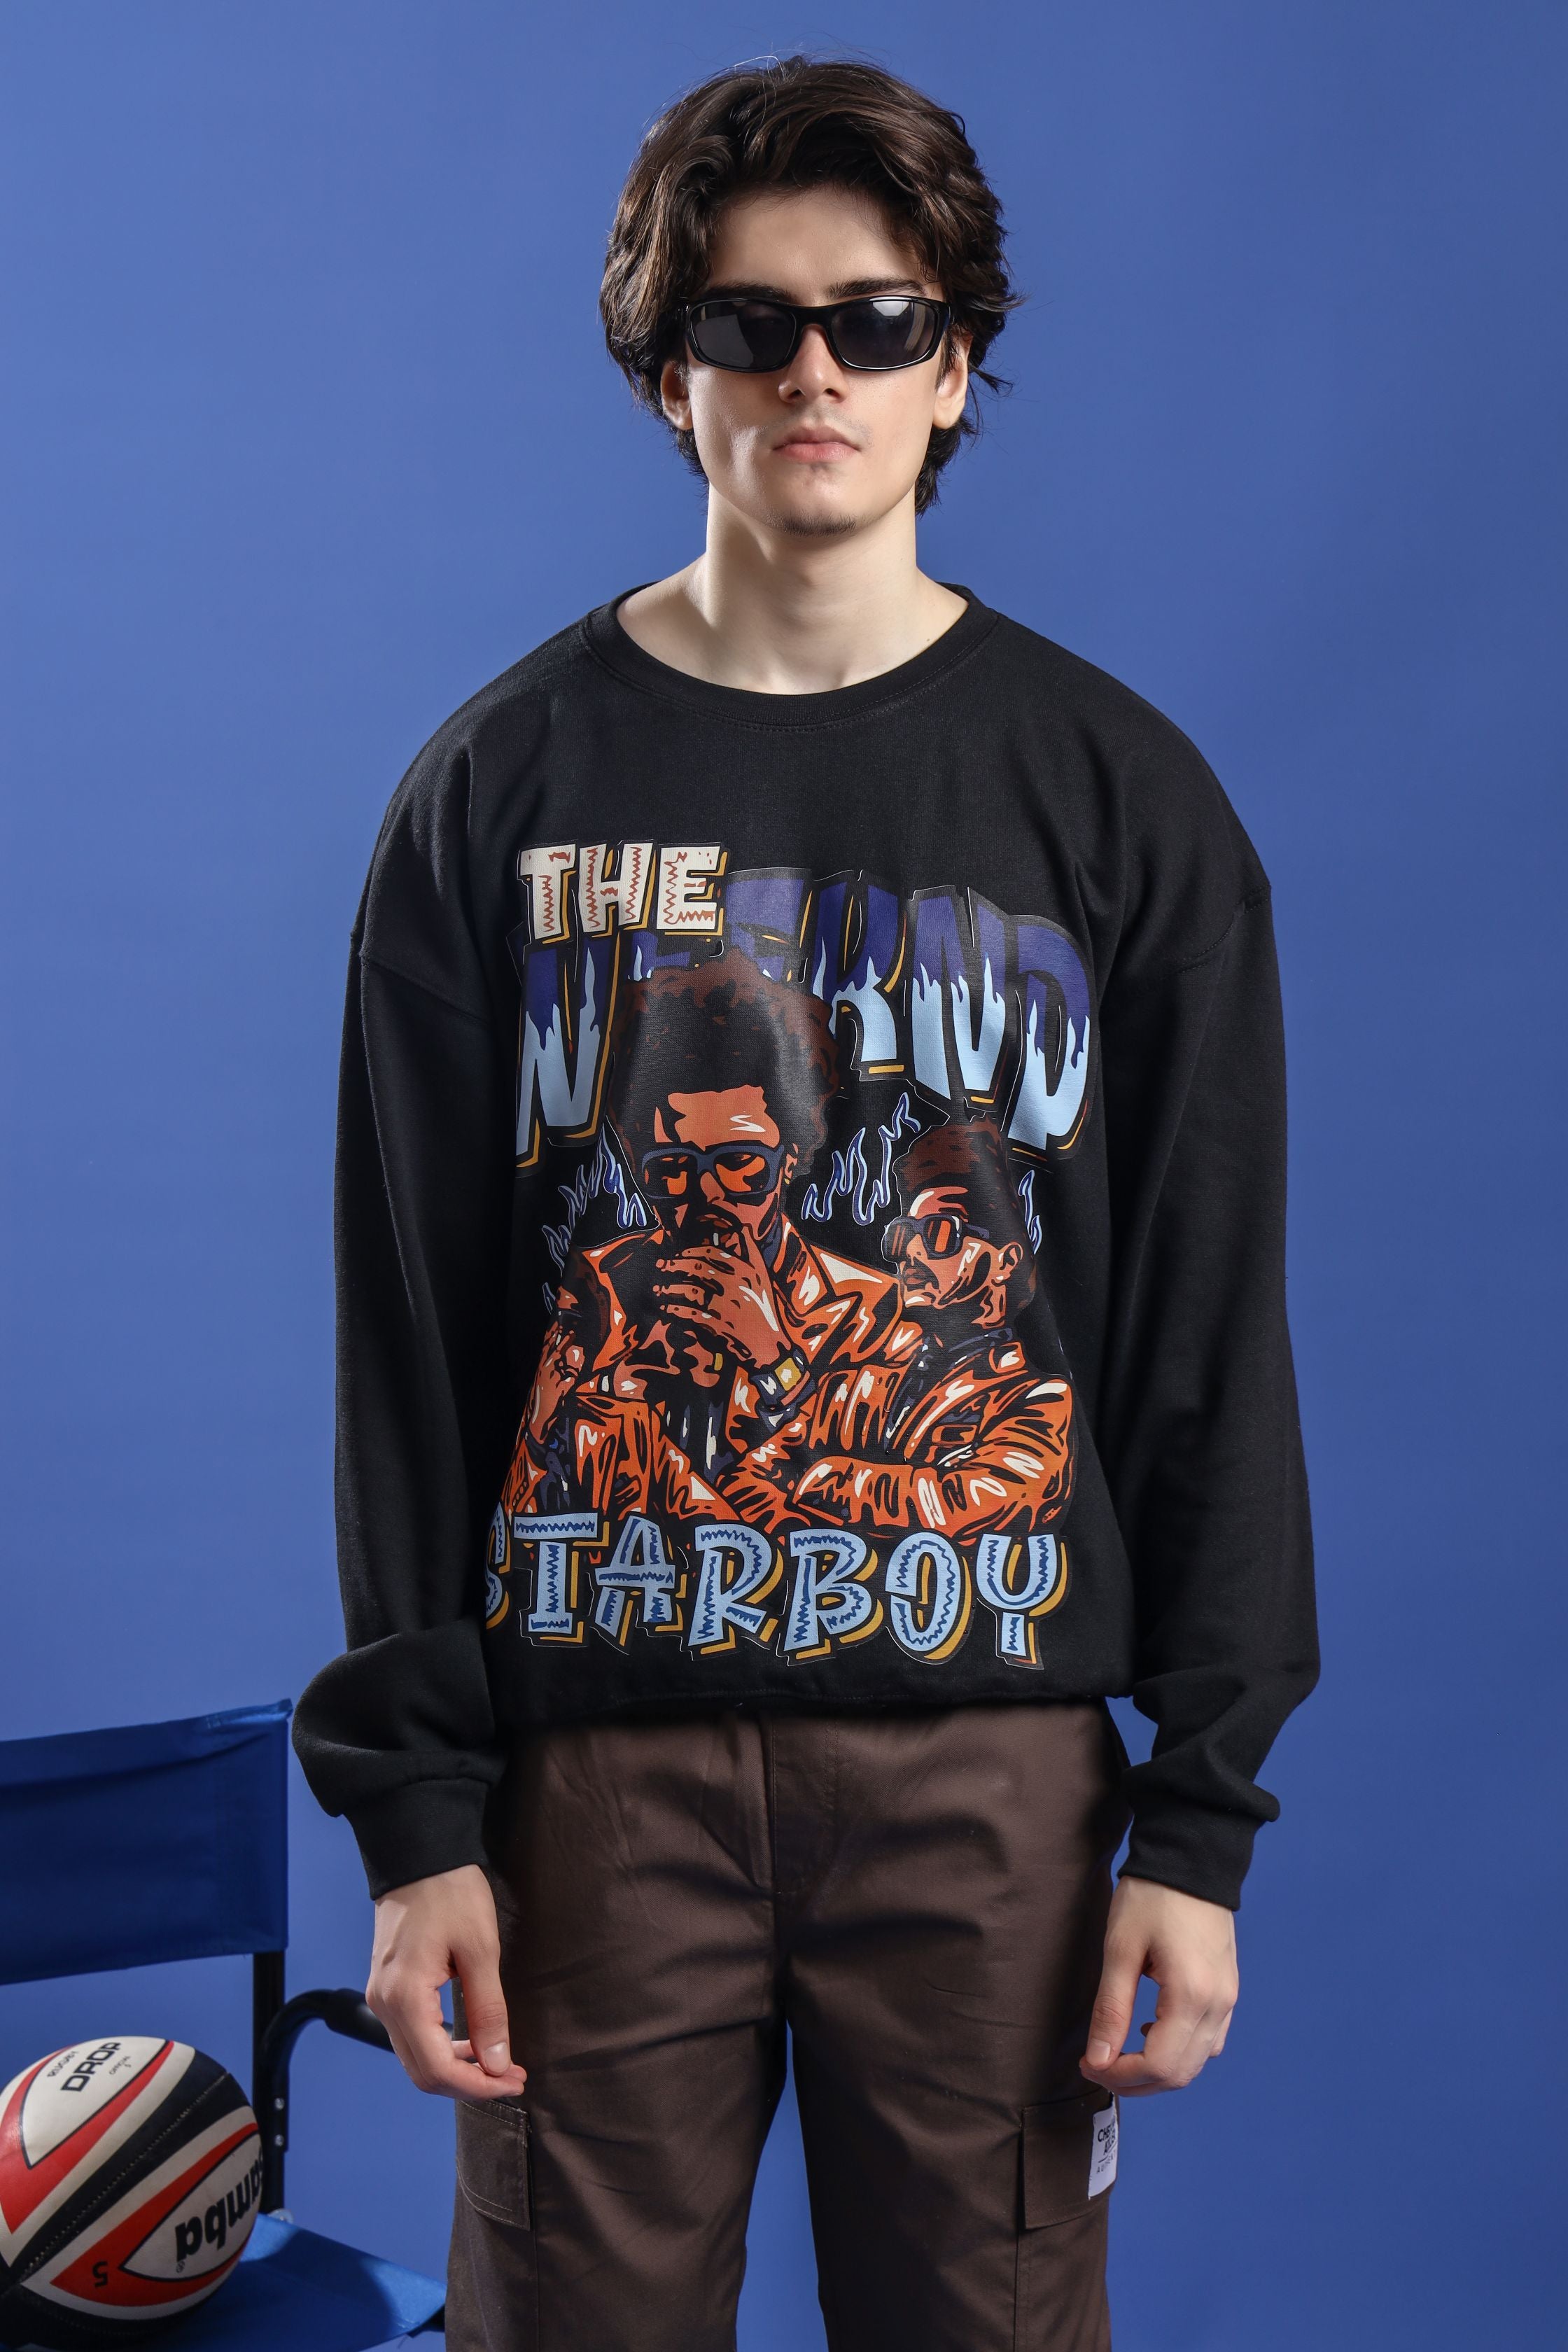 The Weeknd Starboy Oversized Hoodie With Photo Print